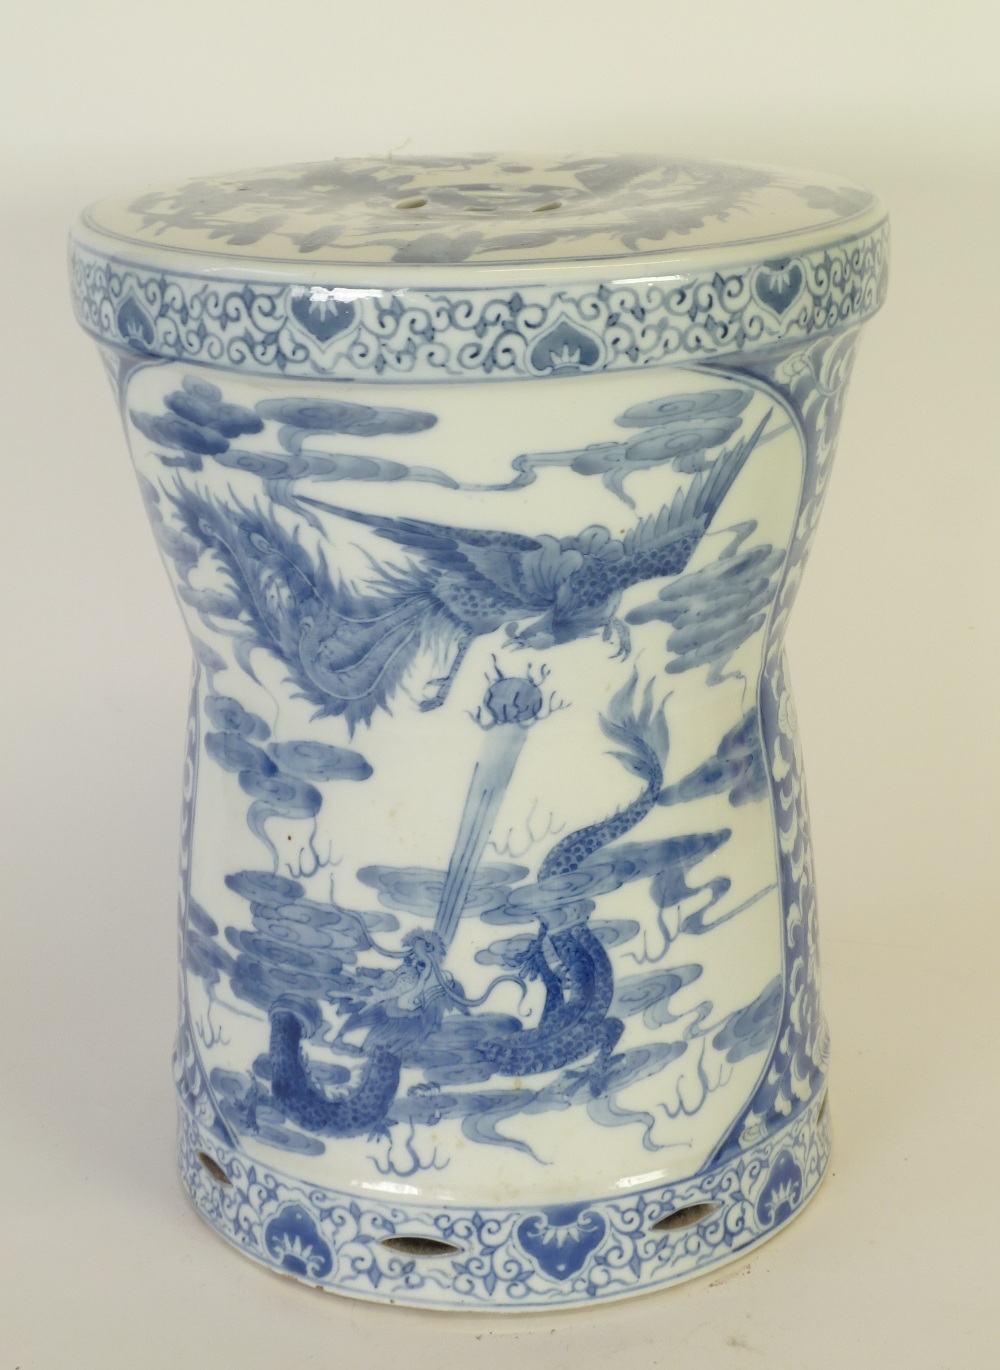 A TWENTIETH CENTURY CHINESE PORCELAIN SEAT OF WAISTED DRUM FORM, painted in underglaze blue with